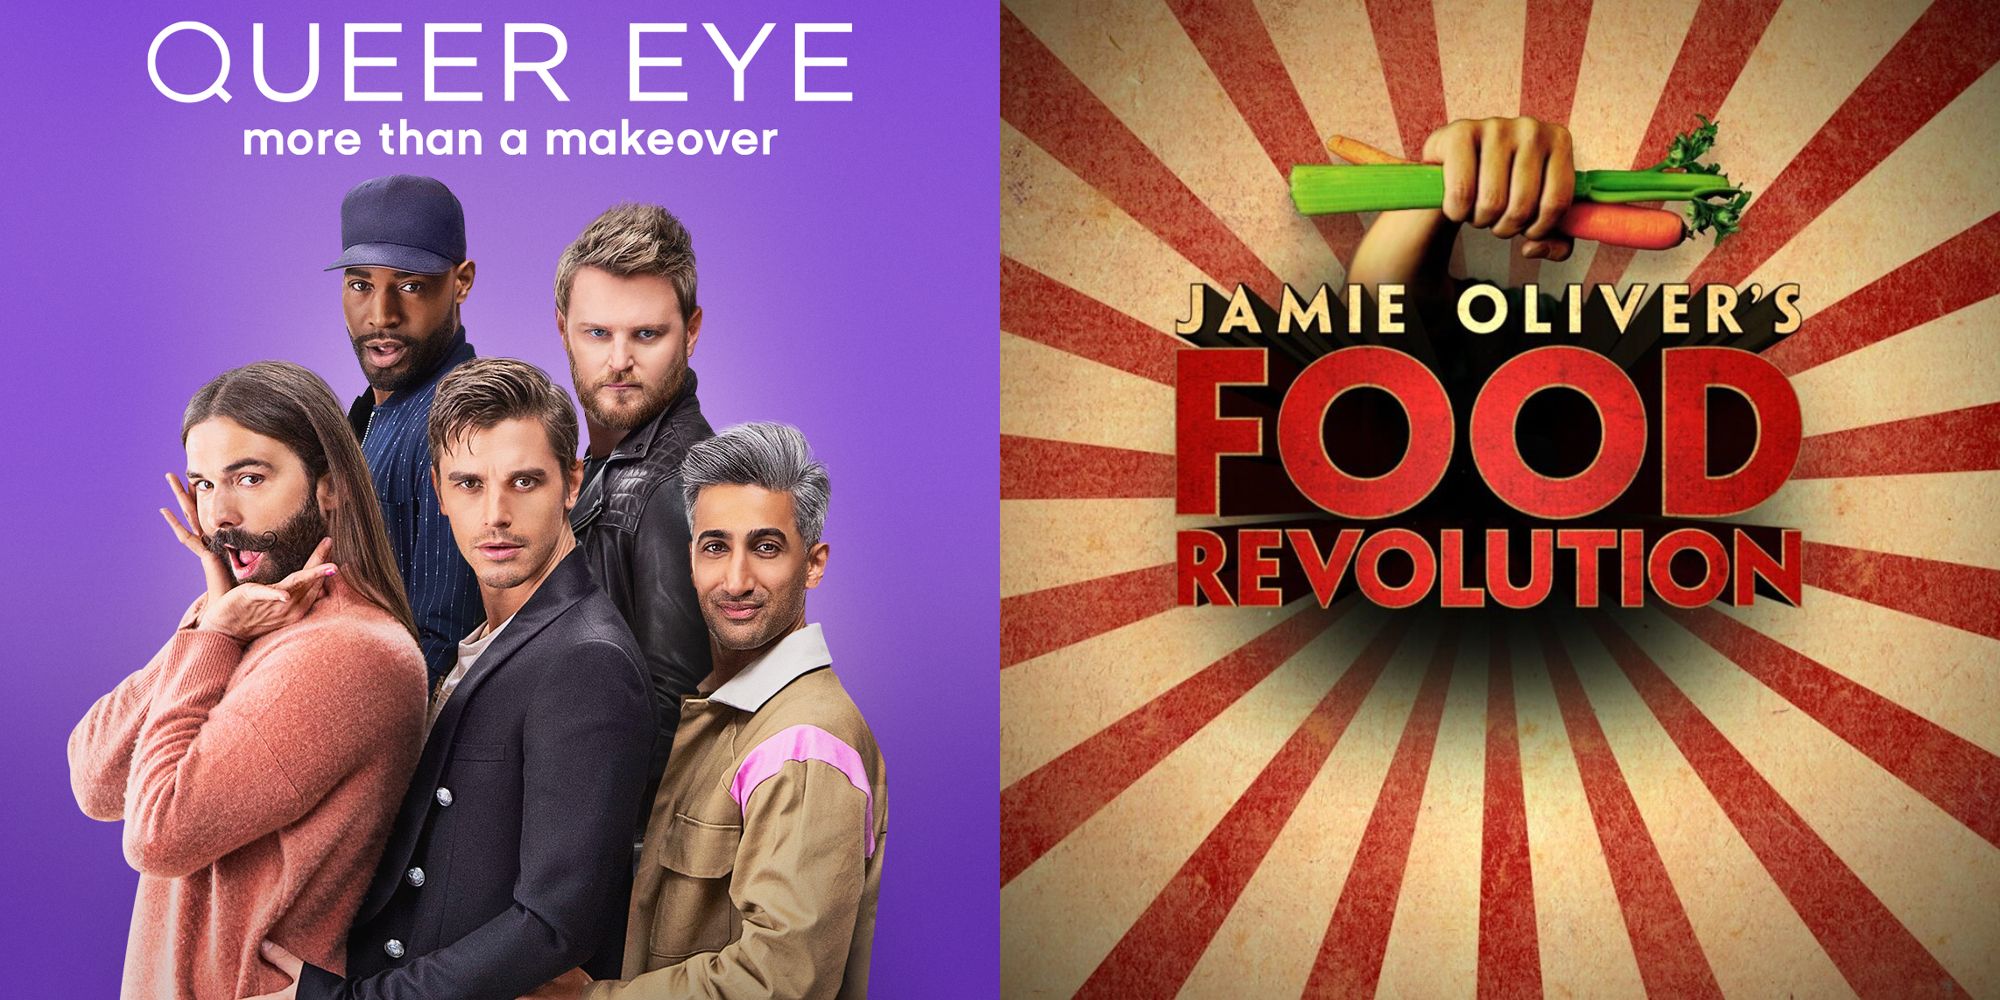 Split image showing posters for Queer Eye and Jamie Oliver's Food Revolution